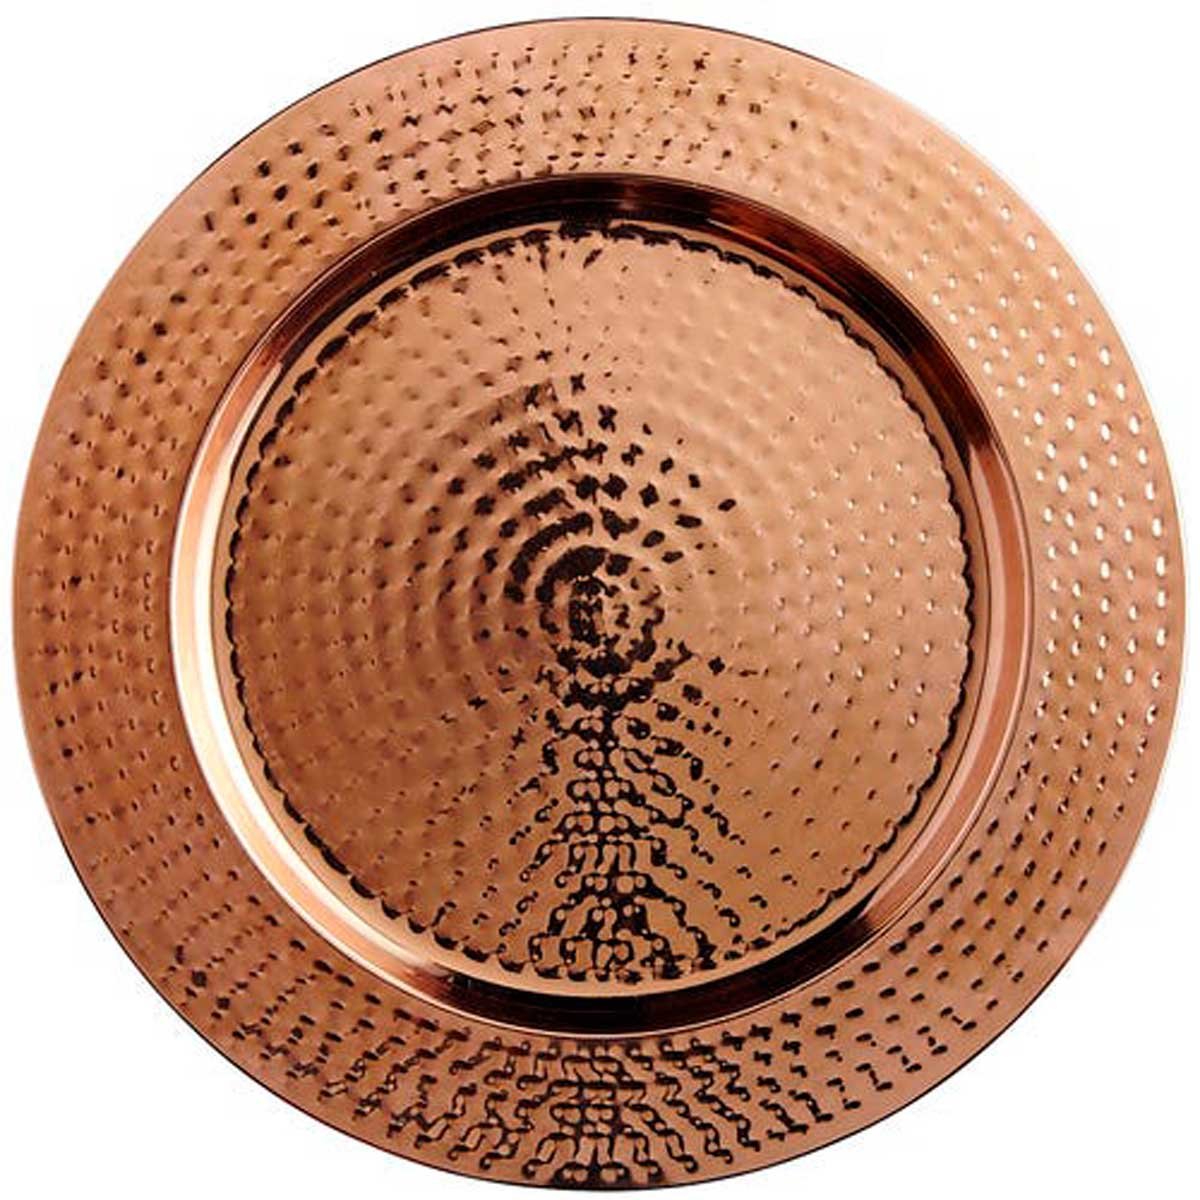 Plato Base Hammered Copper Pier 1 Imports